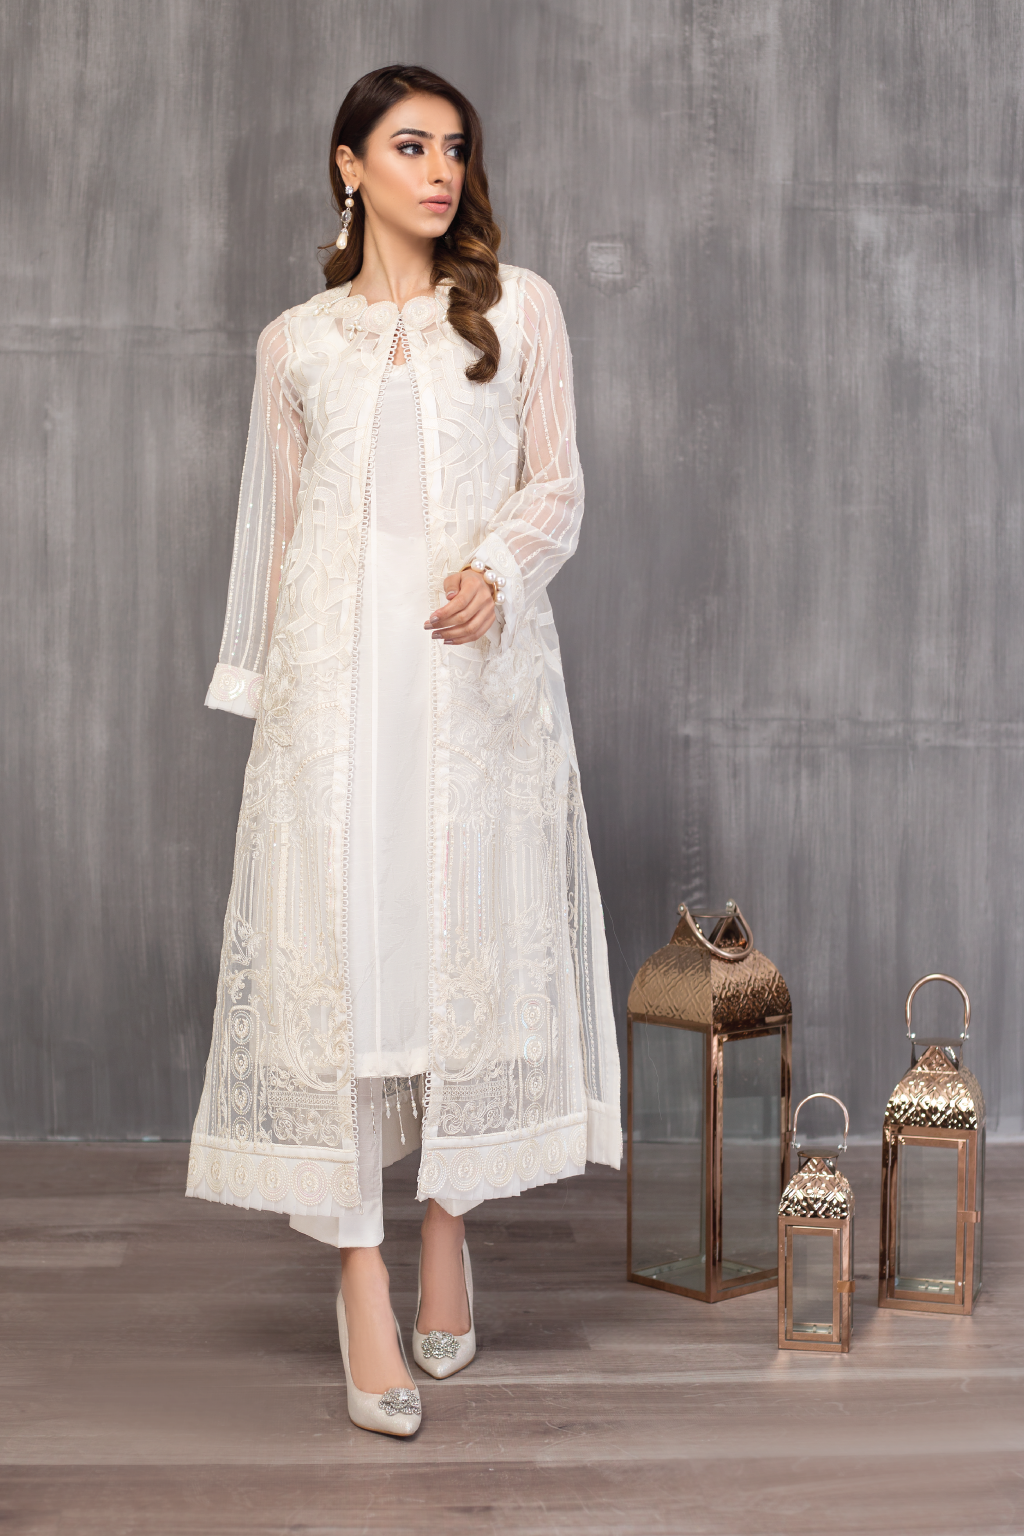 Iznik Pret Wear 2021 | PURITY White 3 piece lawn dress is most popular for Eid dress and summer outfits. We have wide range of stitched and Readymade dresses of Iznik lawn 2021, Iznik pret '21. This Eid get yourself elegant and classy outfit of Iznik in USA, UK, France, Spain from Lebaasonline at SALE price!